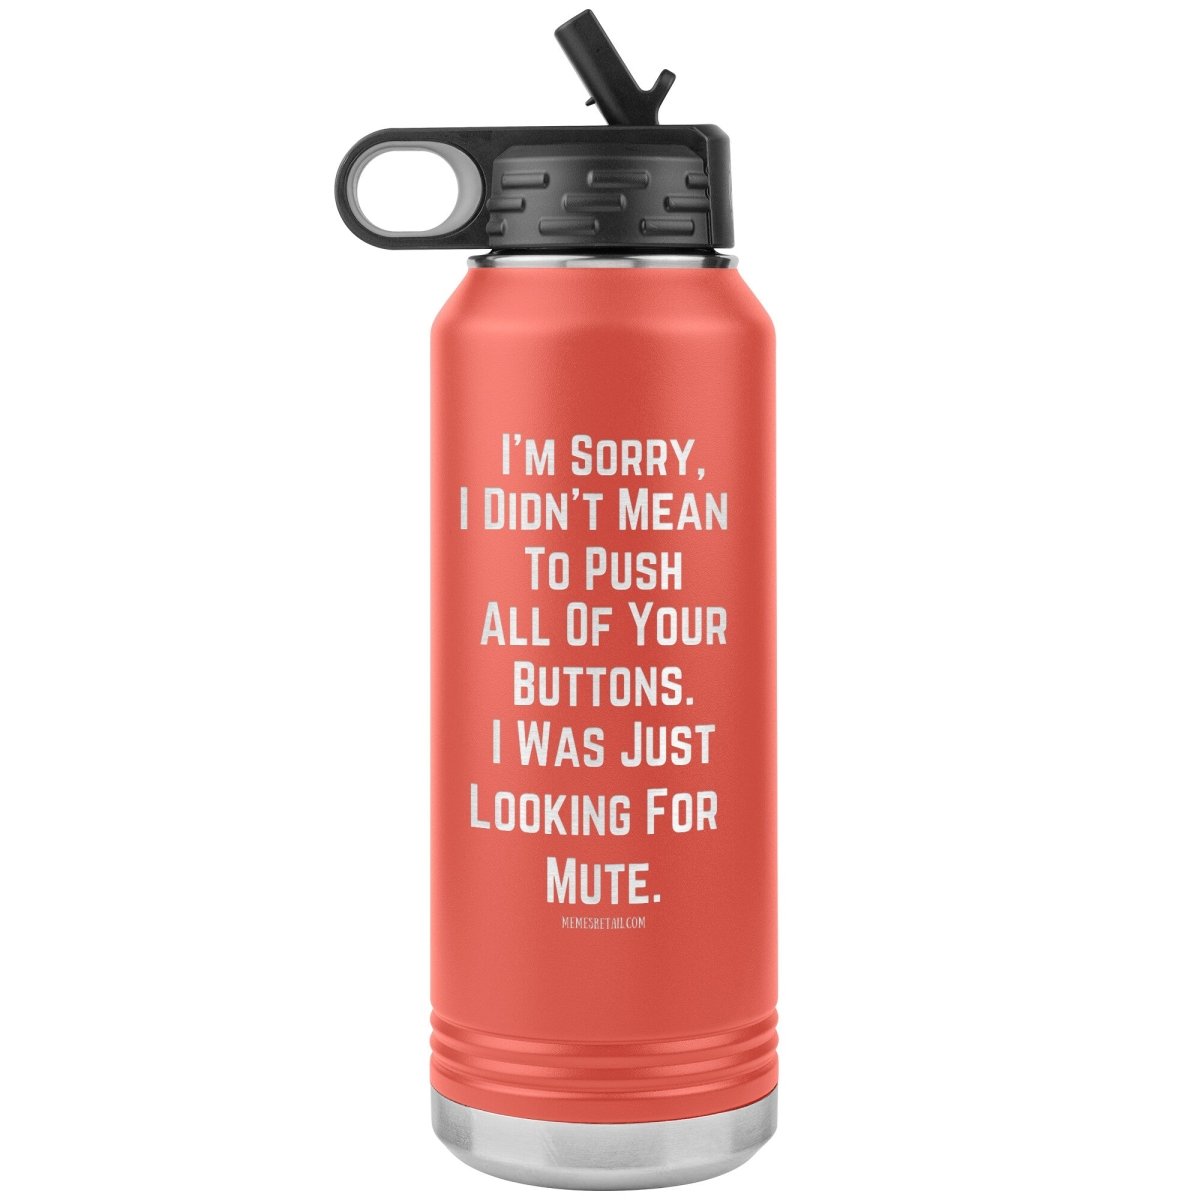 I’m sorry, I didn’t mean to push all your buttons, I was just looking for mute 32 oz water tumbler, Coral - MemesRetail.com